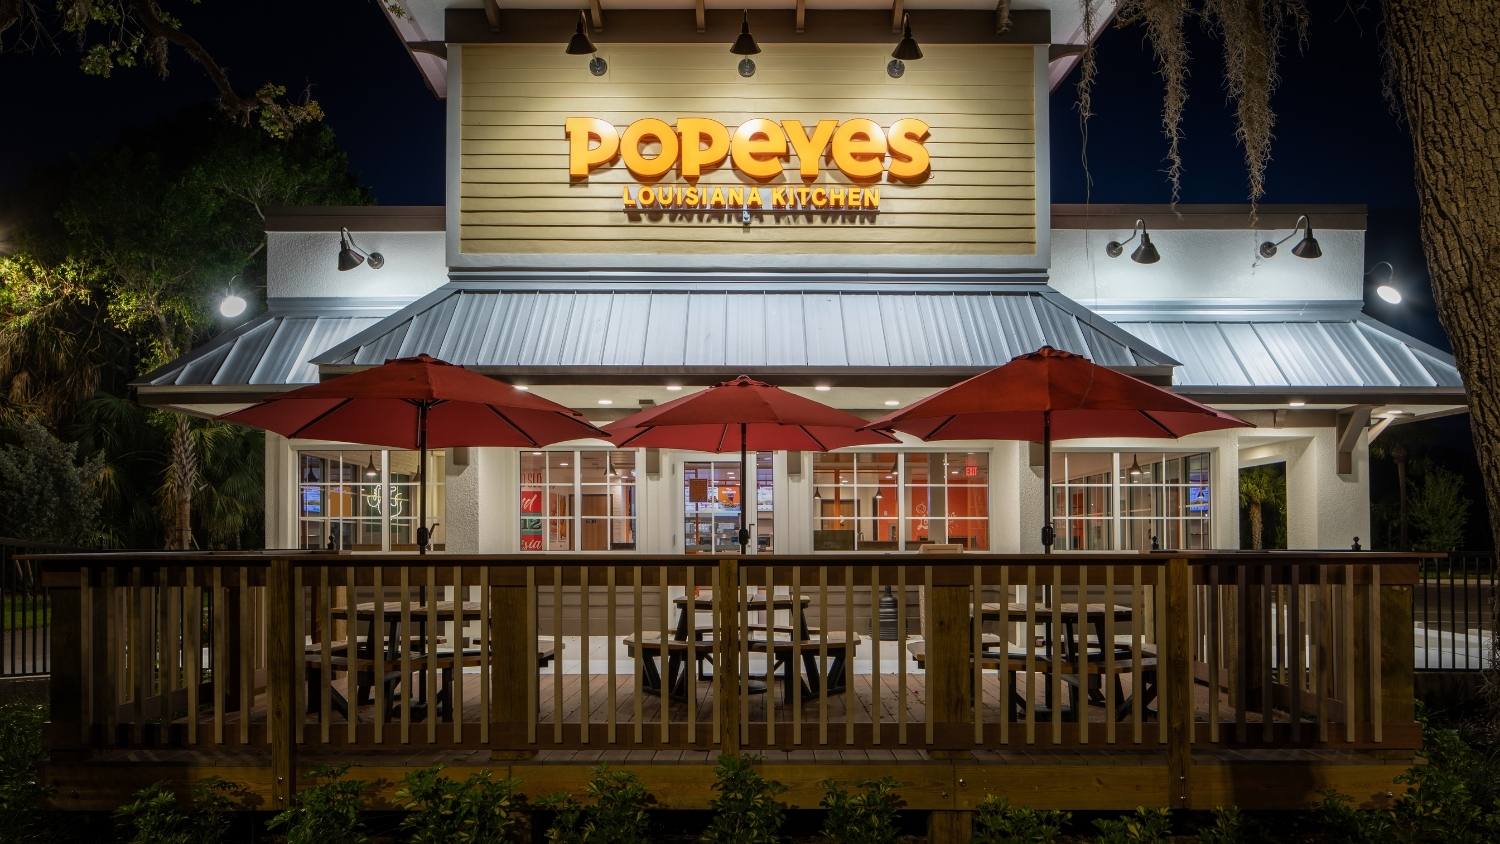 PBS Contractors Completes Renovation for Popeyes Louisiana Kitchen in Bonita Springs